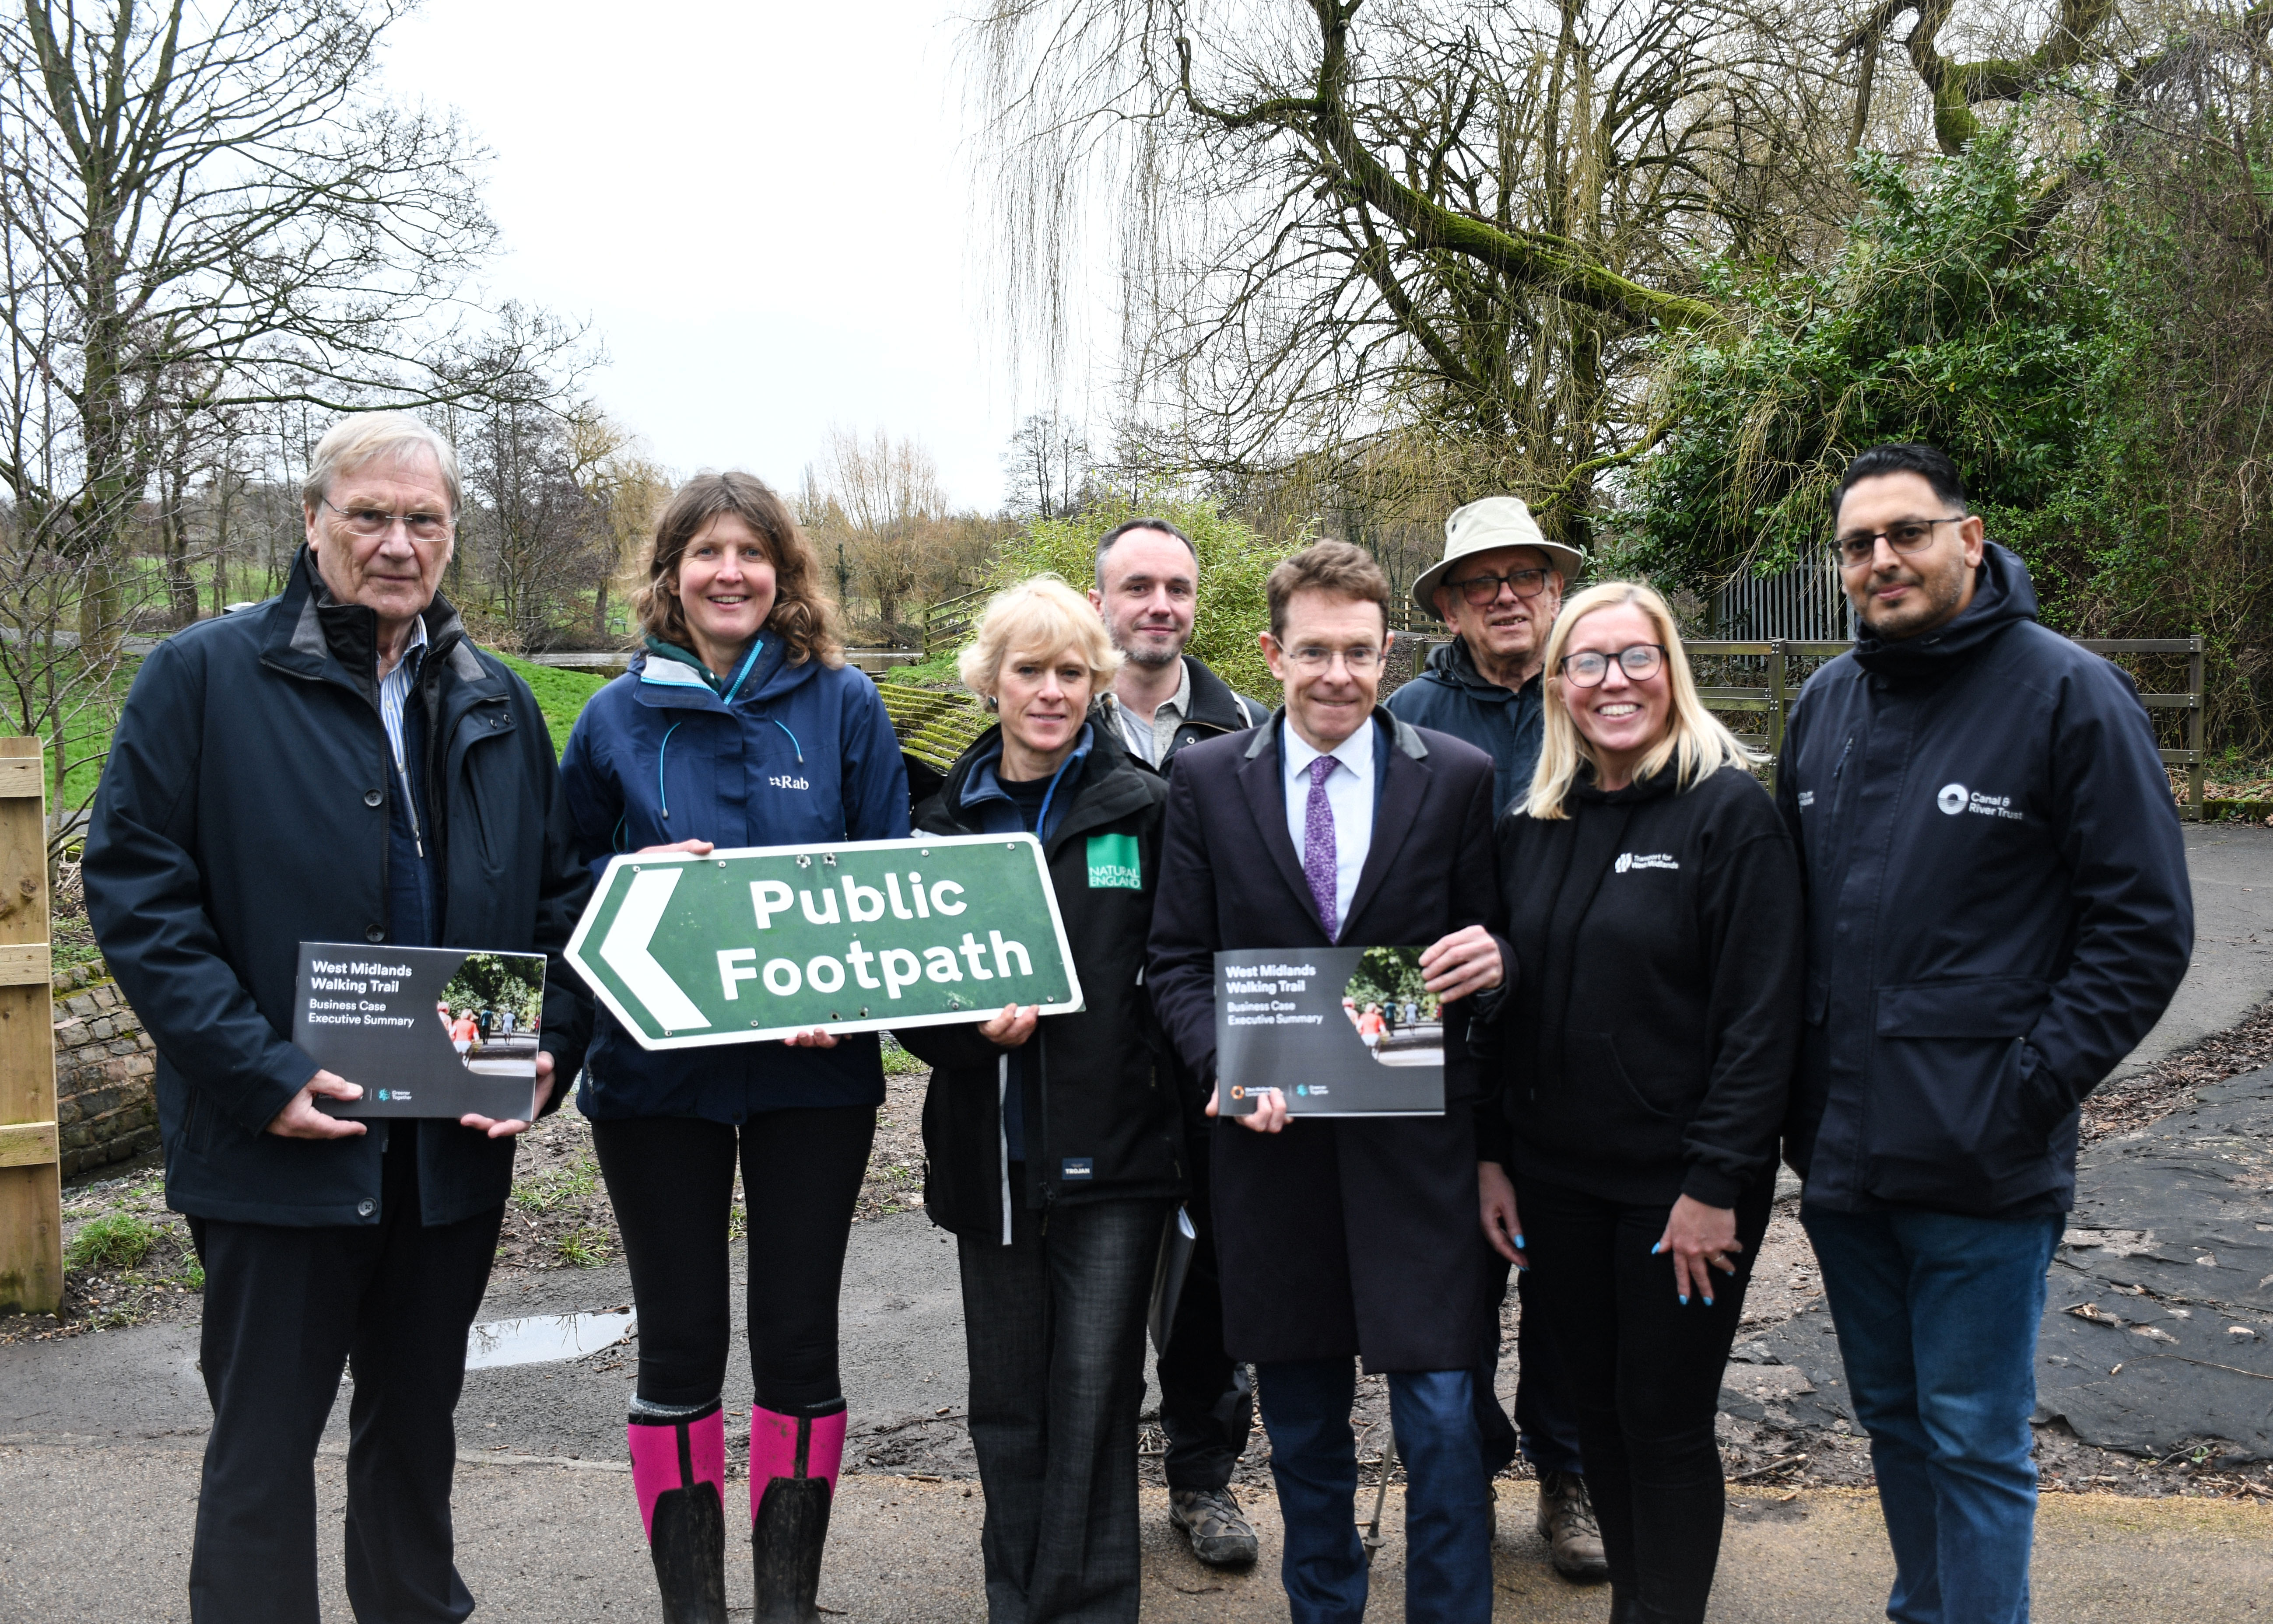 Mayor Andy Street, centre, met with local groups and stakeholders at Elmdon Park in Solihull to discuss progress of the West Midlands Walking Trail. They included Cllr Ian Courts, leader of Solihull Council; Jackie Homan, WMCA’s head of environment; Emma Johnson, Natural England; James MacColl and Nick Hillier, The Ramblers; and Claire Williams and Tahir Parvaz, Canal and River Trust.